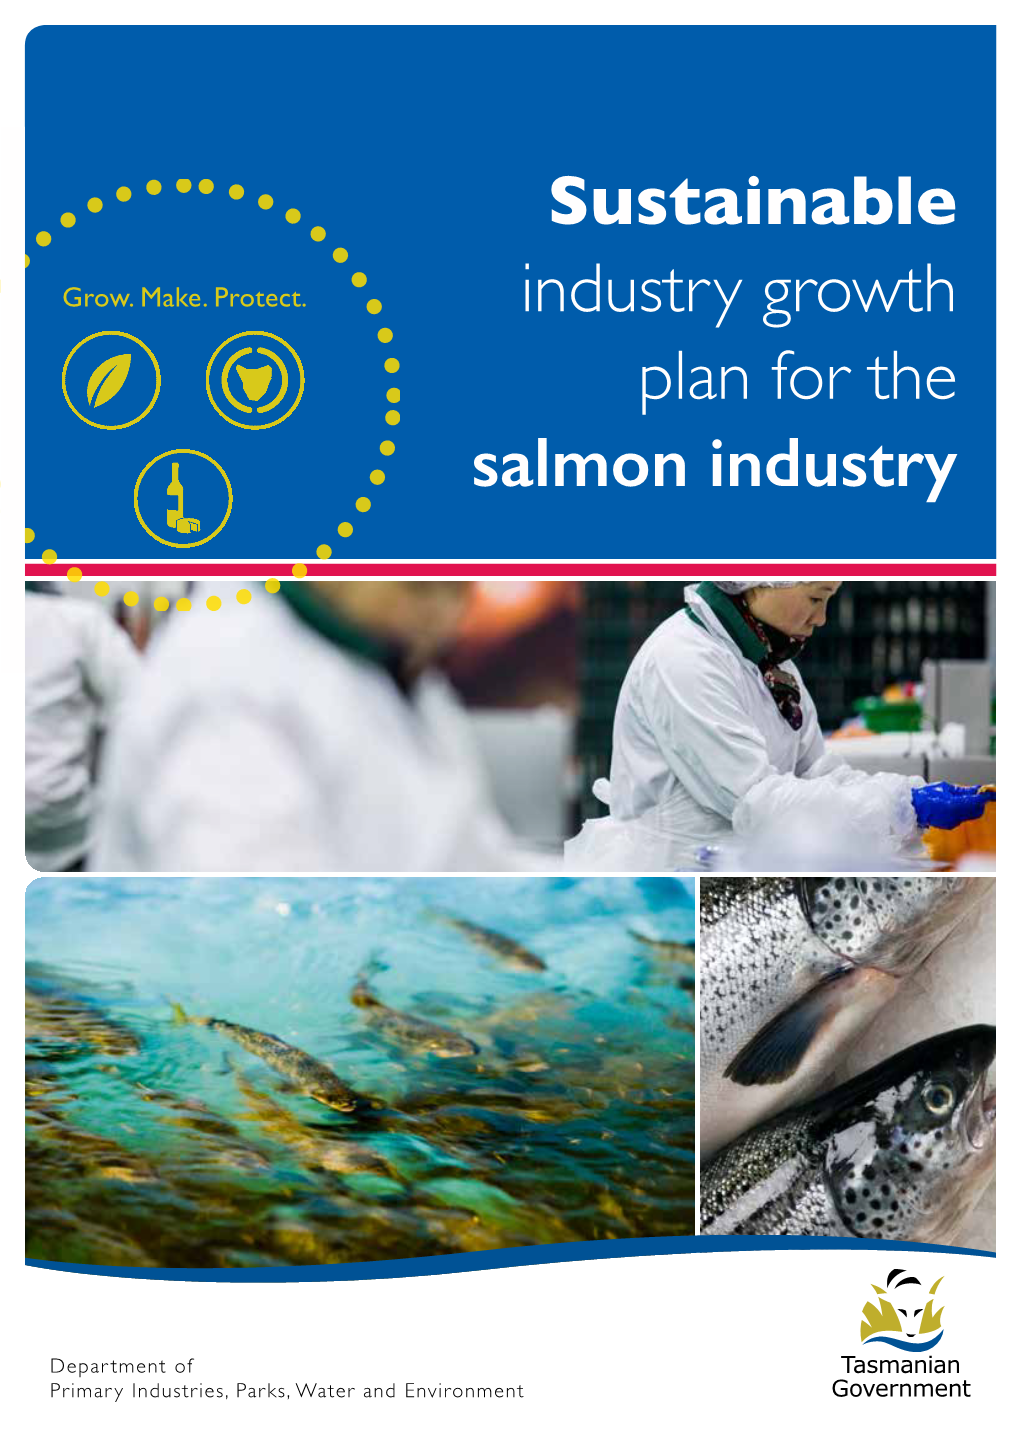 Sustainable Industry Growth Plan for the Salmon Industry